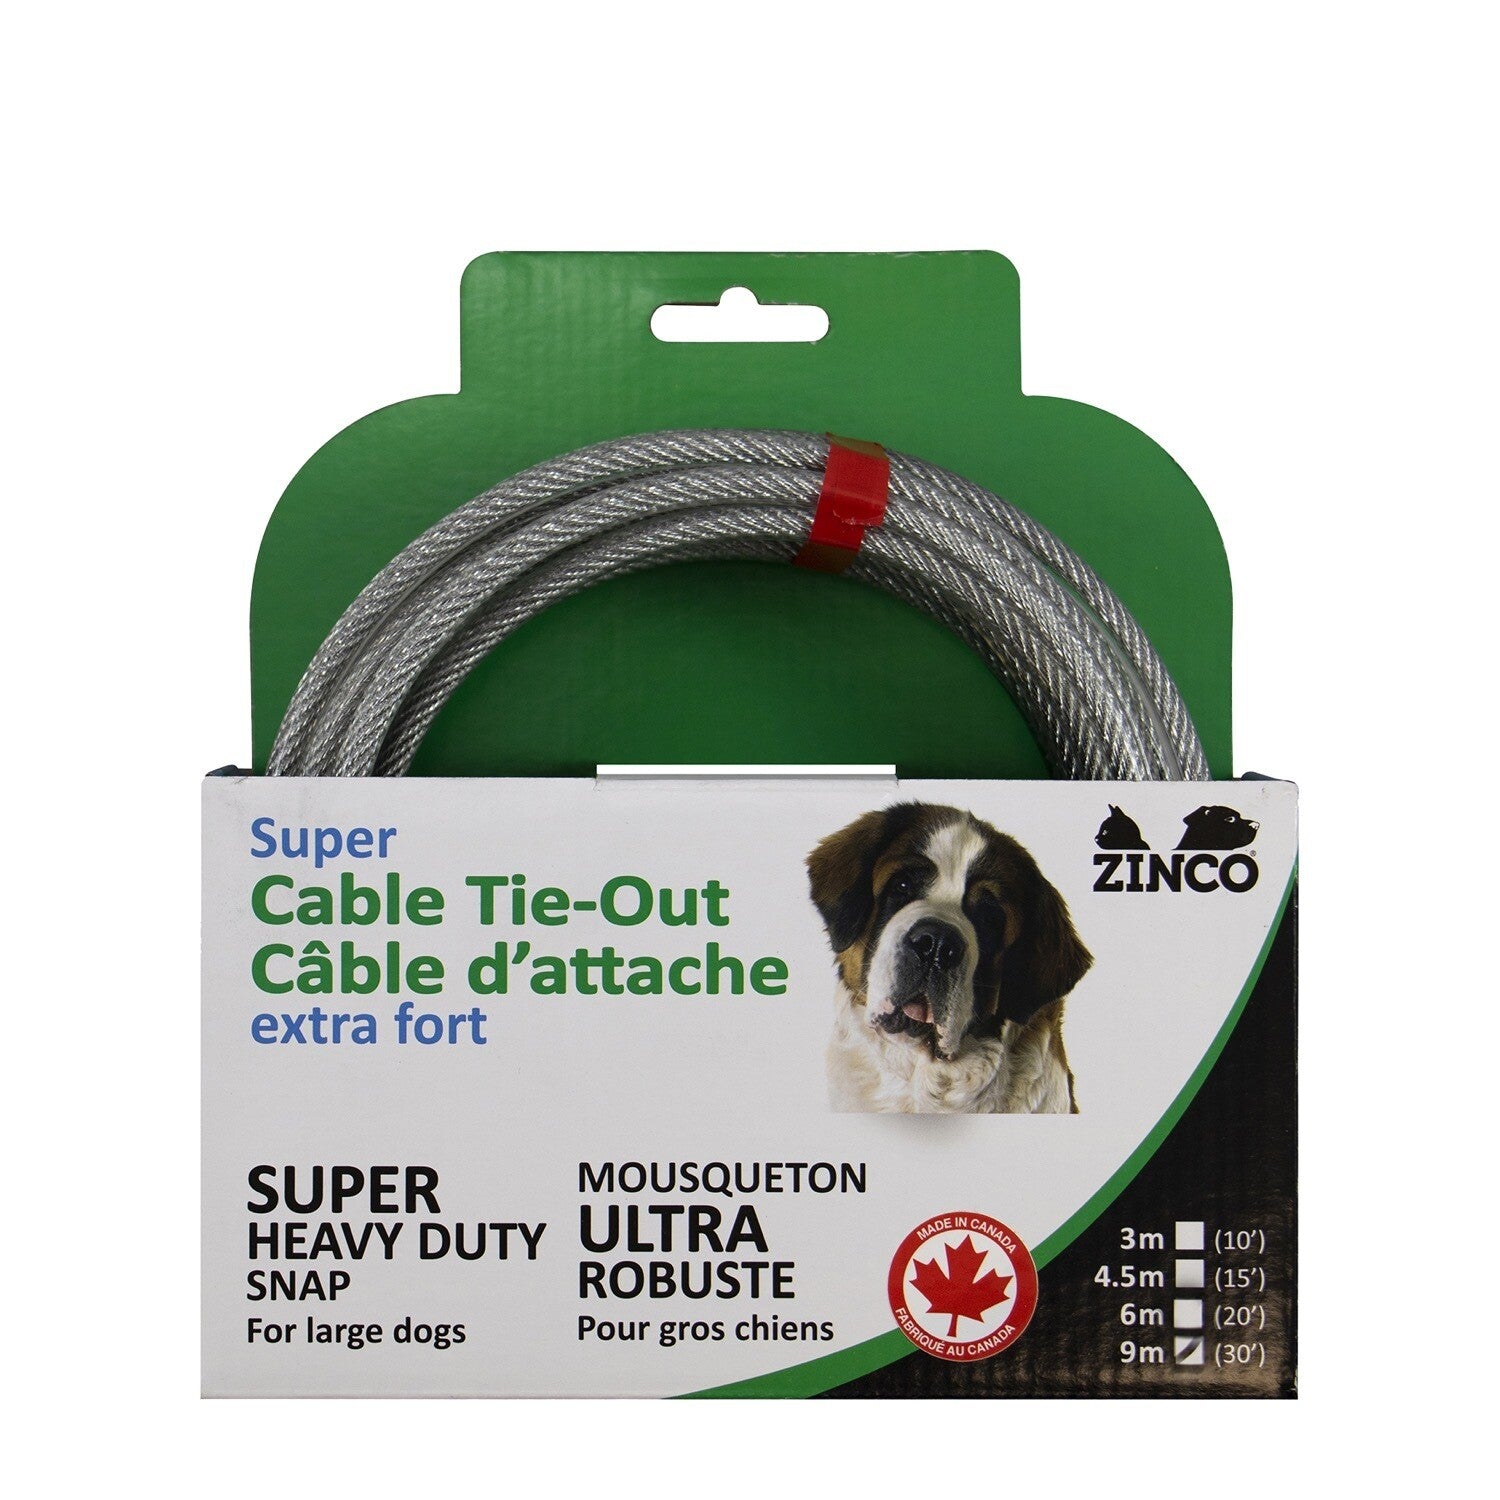 Zinco Super Heavy Duty Tie Out Cable - 30' (9m) - For Large Dogs